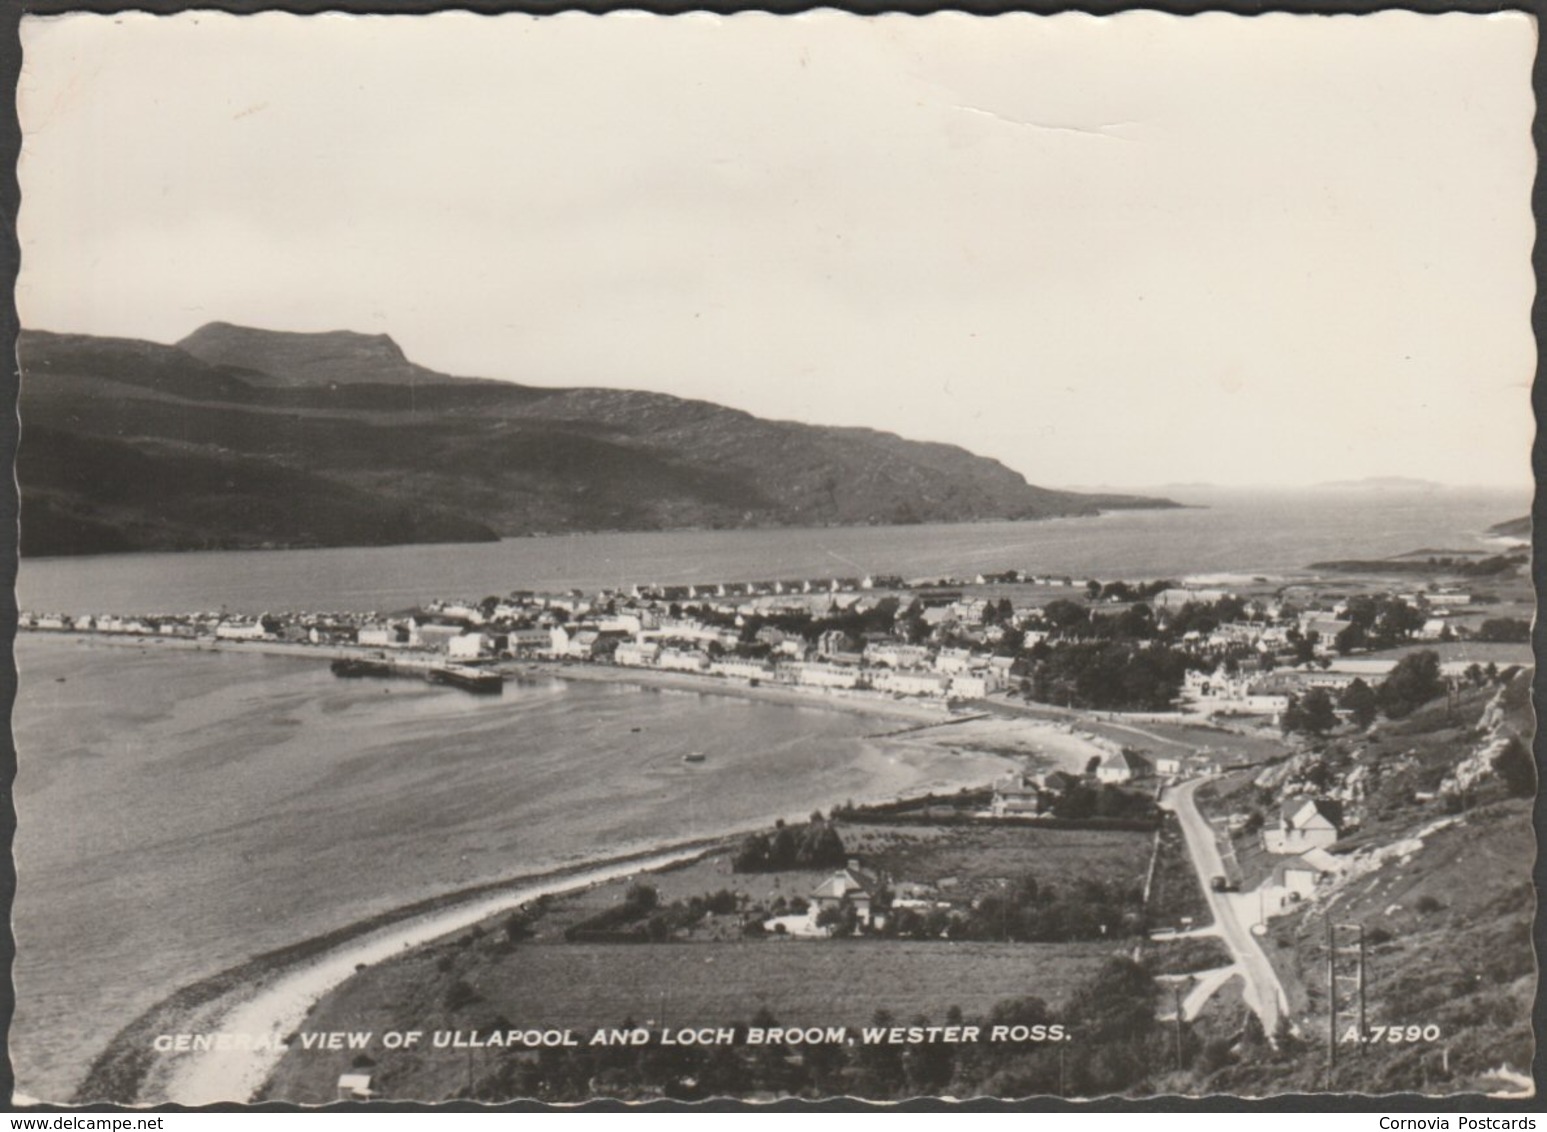 General View Of Ullapool And Loch Broom, Wester Ross, Sutherland, C.1950s - J B White RP Postcard - Sutherland